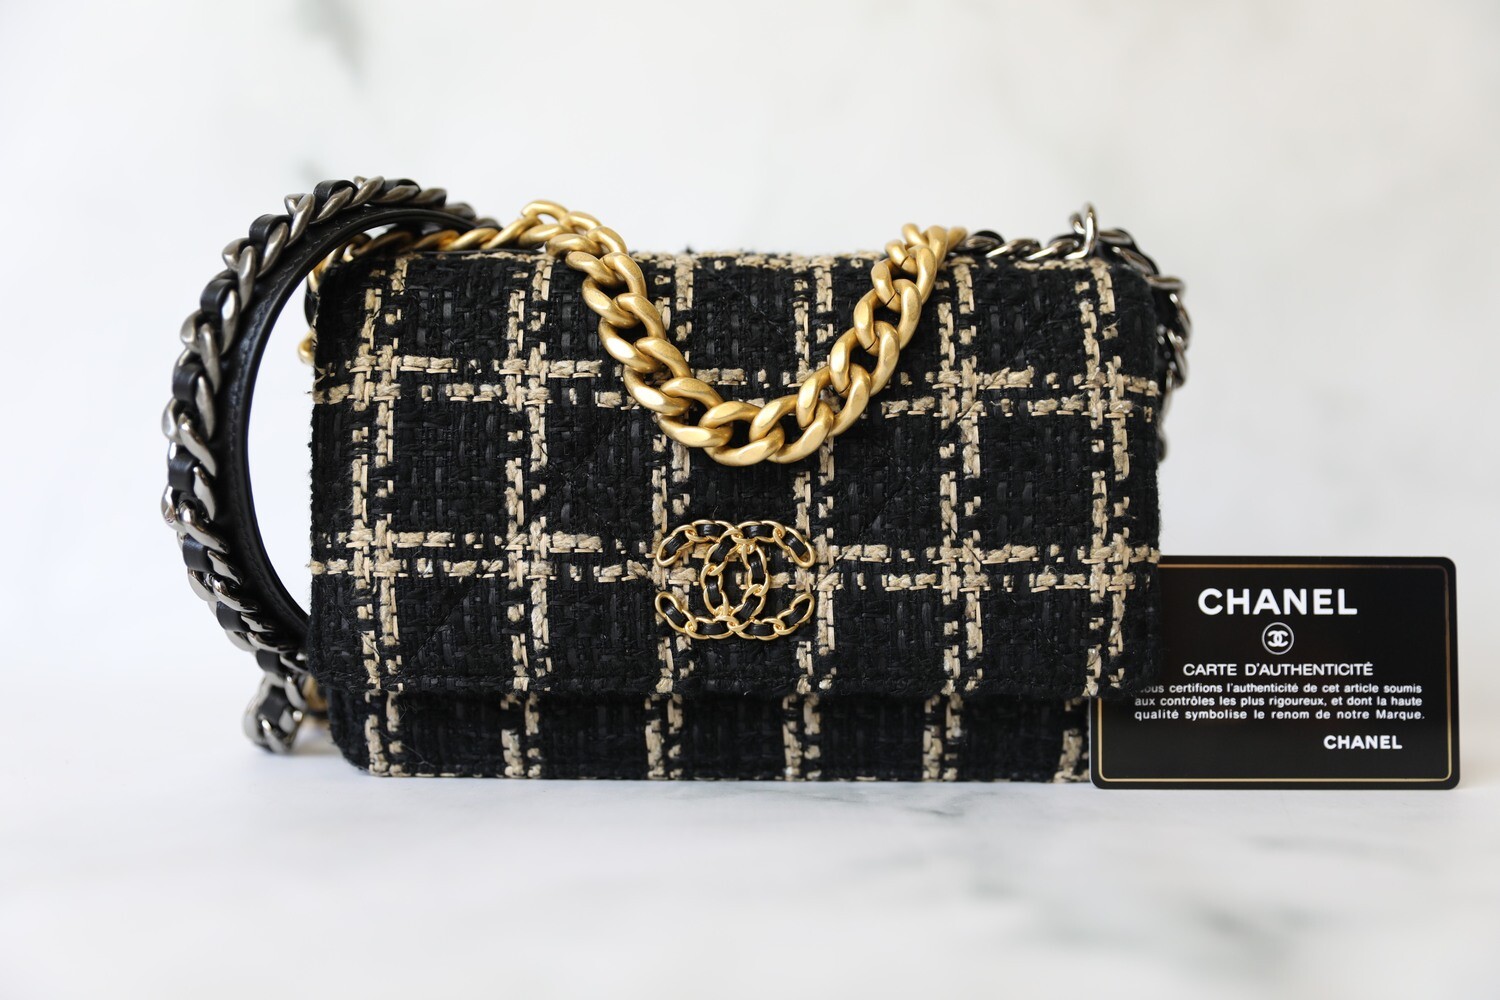 Chanel 19 Wallet on Chain, Beige and Black Tweed Plaid, New in Box MA001